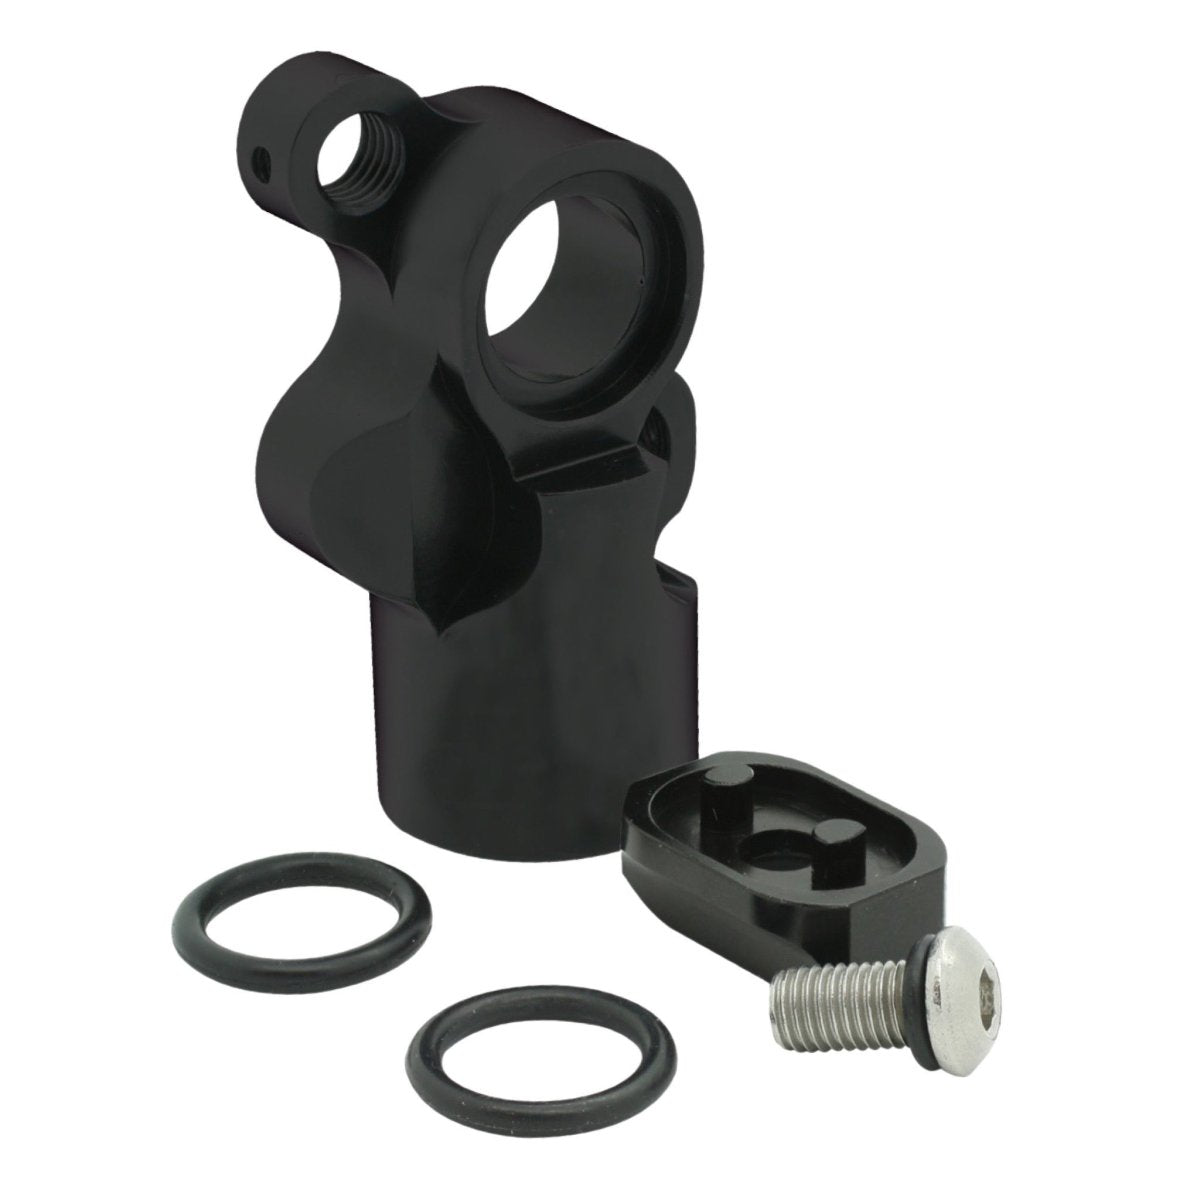 Inception Designs Extended Reach Front Block Kit - Time 2 Paintball